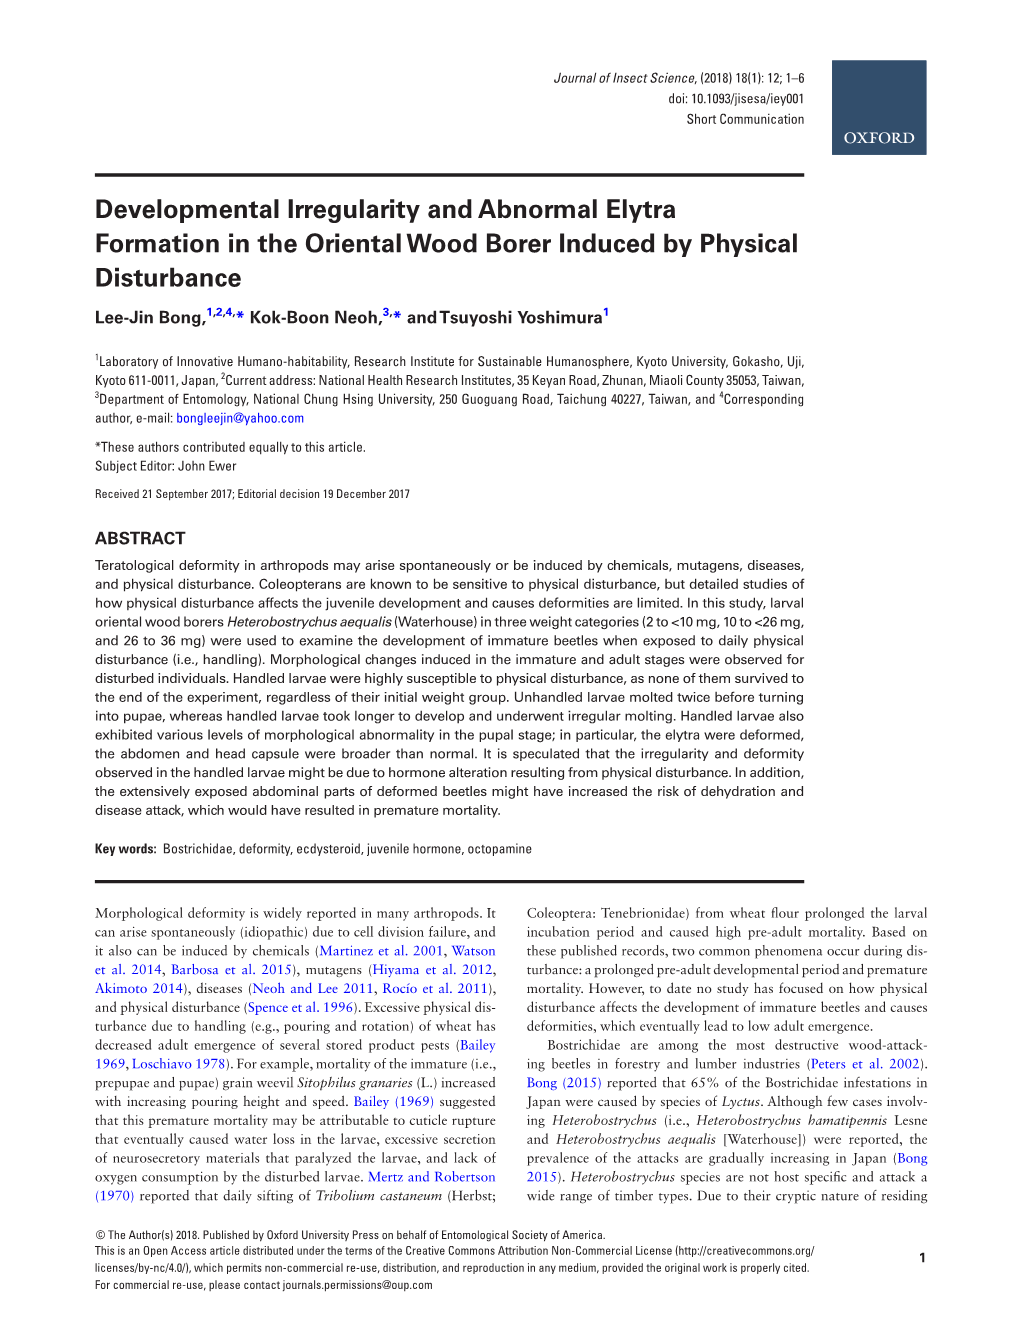 Developmental Irregularity and Abnormal Elytra Formation in the Oriental Wood Borer Induced by Physical Disturbance